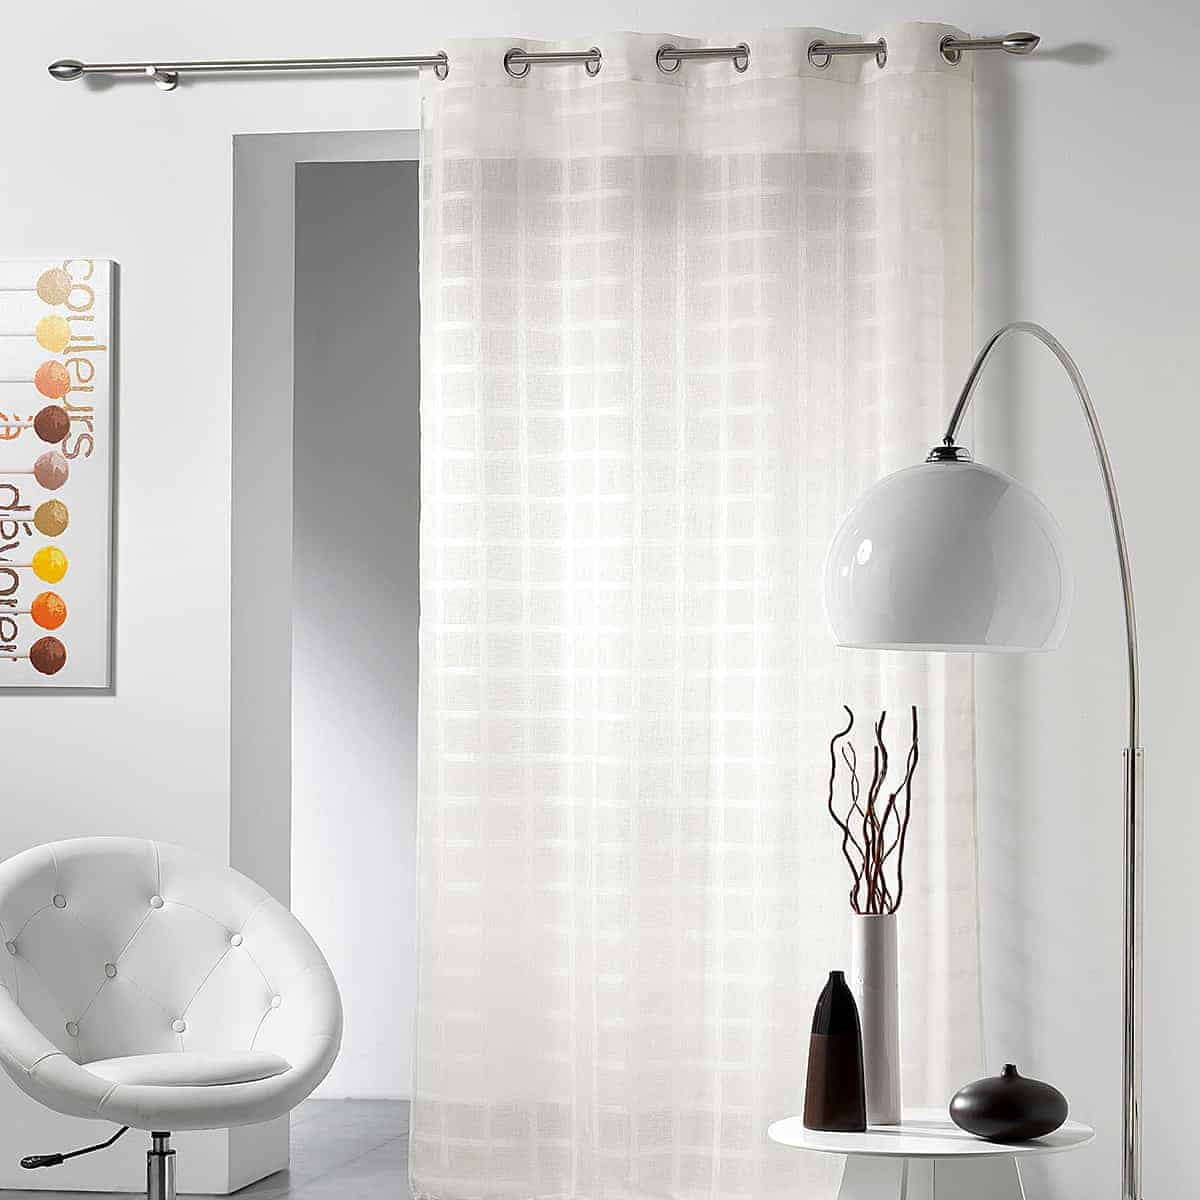 Set of 2 Curtain Panel with Eyelets Sanded Voile Candide 55W x 95L Beige